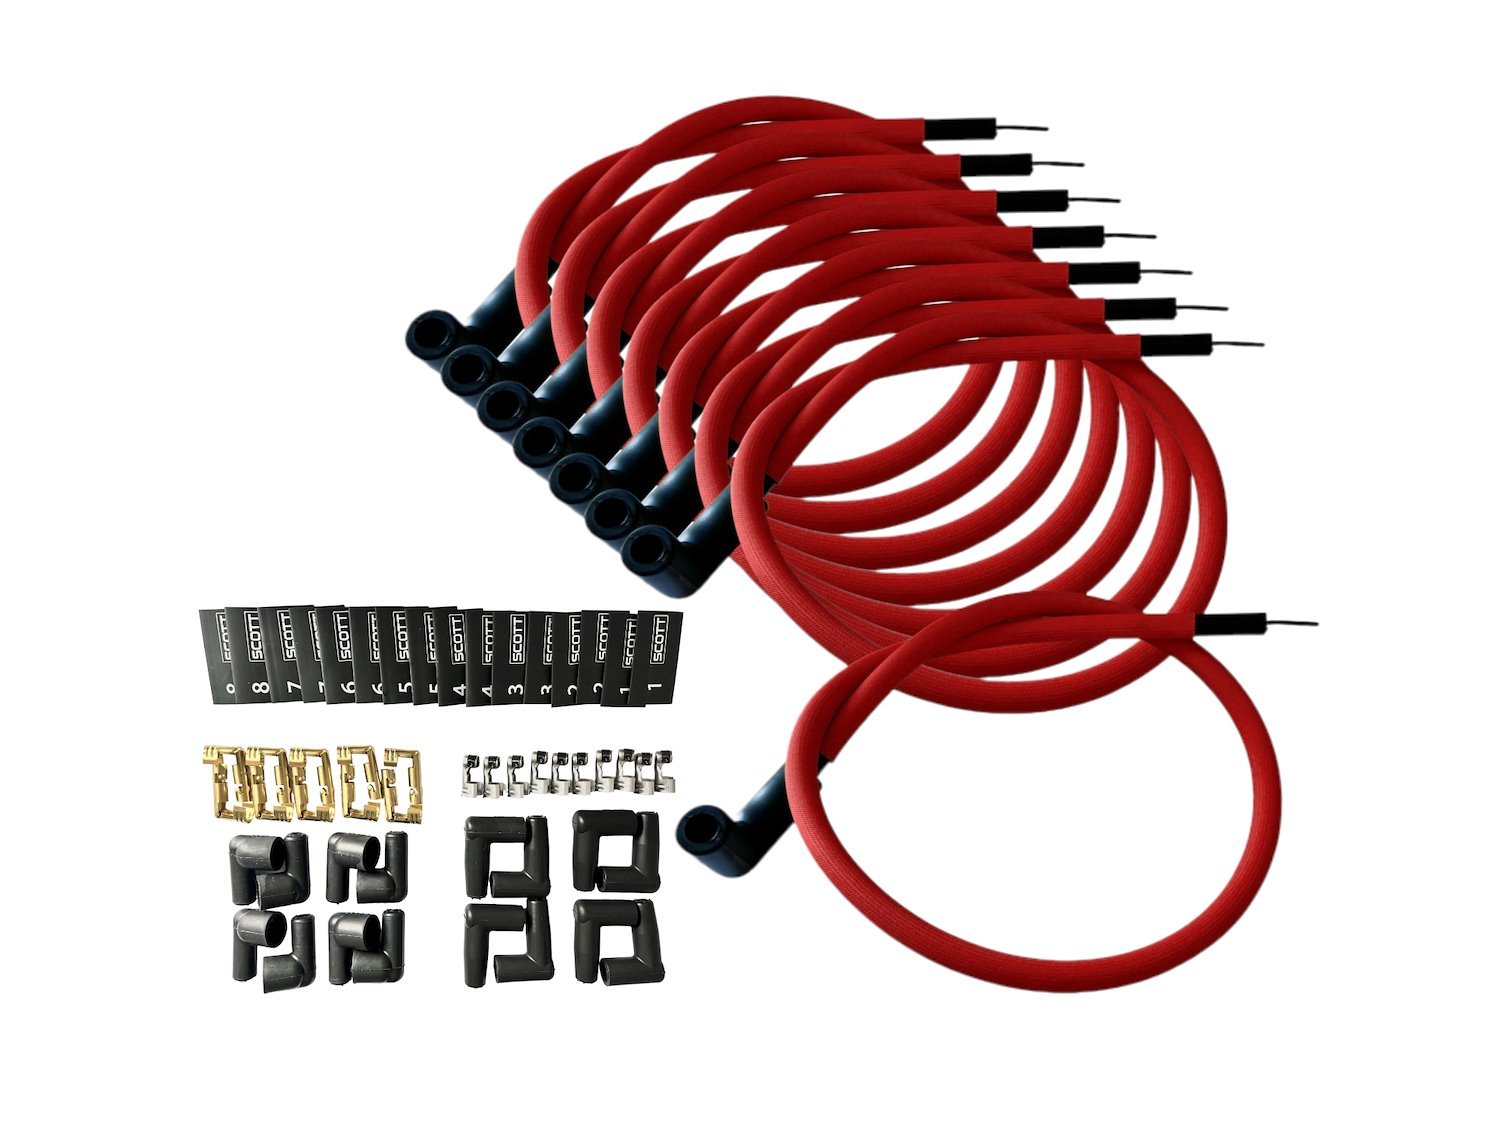 SPW-PS-K90-2 DIY High-Performance Fiberglass-Oversleeved Spark Plug Wire Set for DIY Kits, 90-Degree Boot [Red]